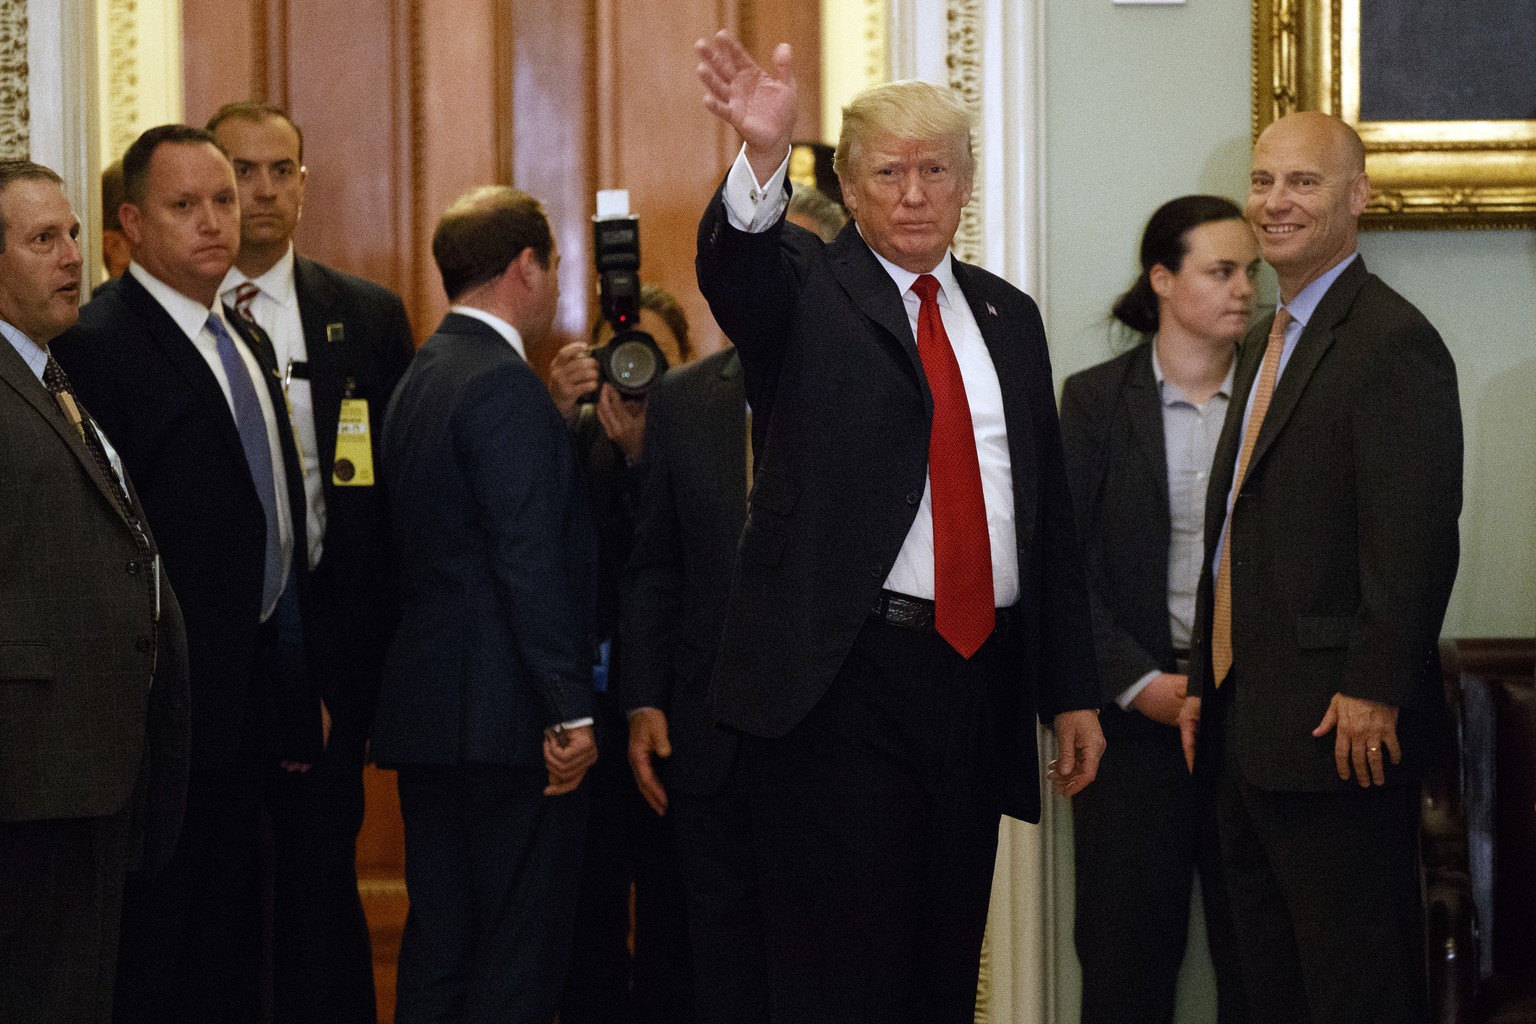 President Donald Trump waves to reporters after a lunch with Republican senator at the U.S. Capitol Tuesday, Oct. 24, 2017, in Washington. (AP Photo/Evan Vucci)